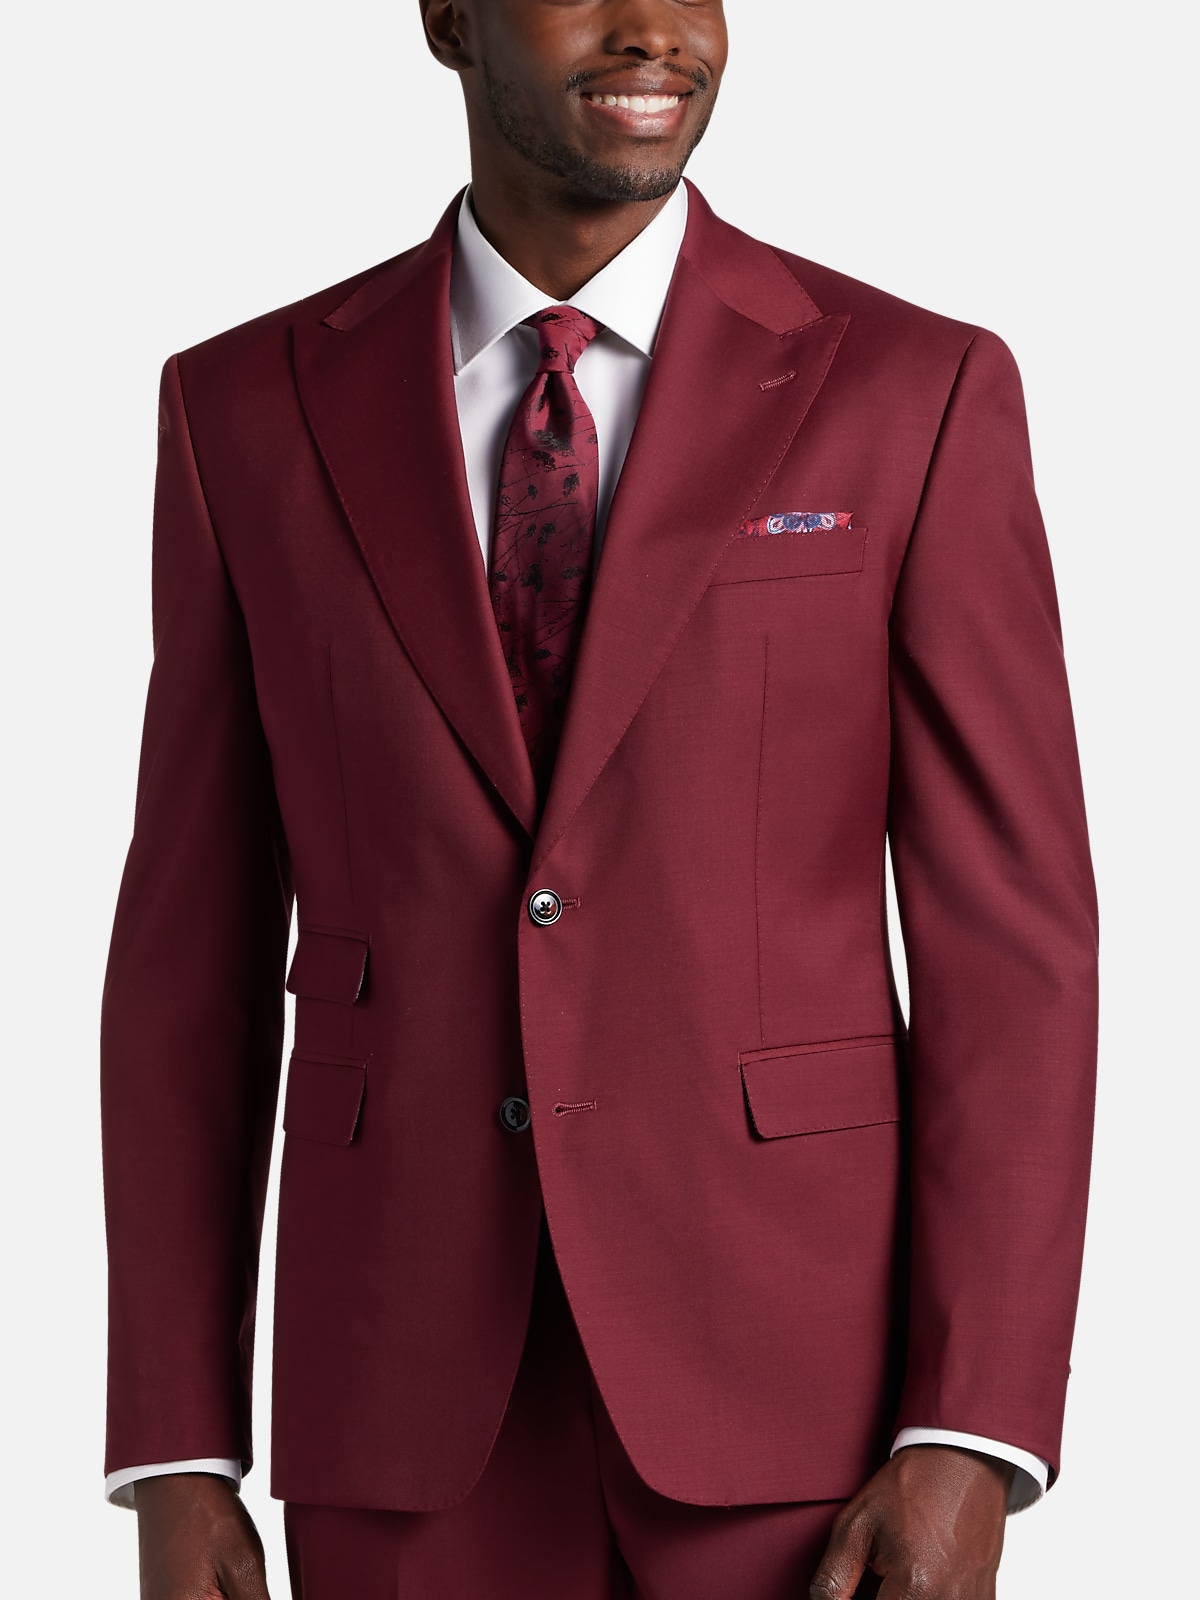 Tayion Classic Fit Suit Separates Coat | All Clothing| Men's Wearhouse